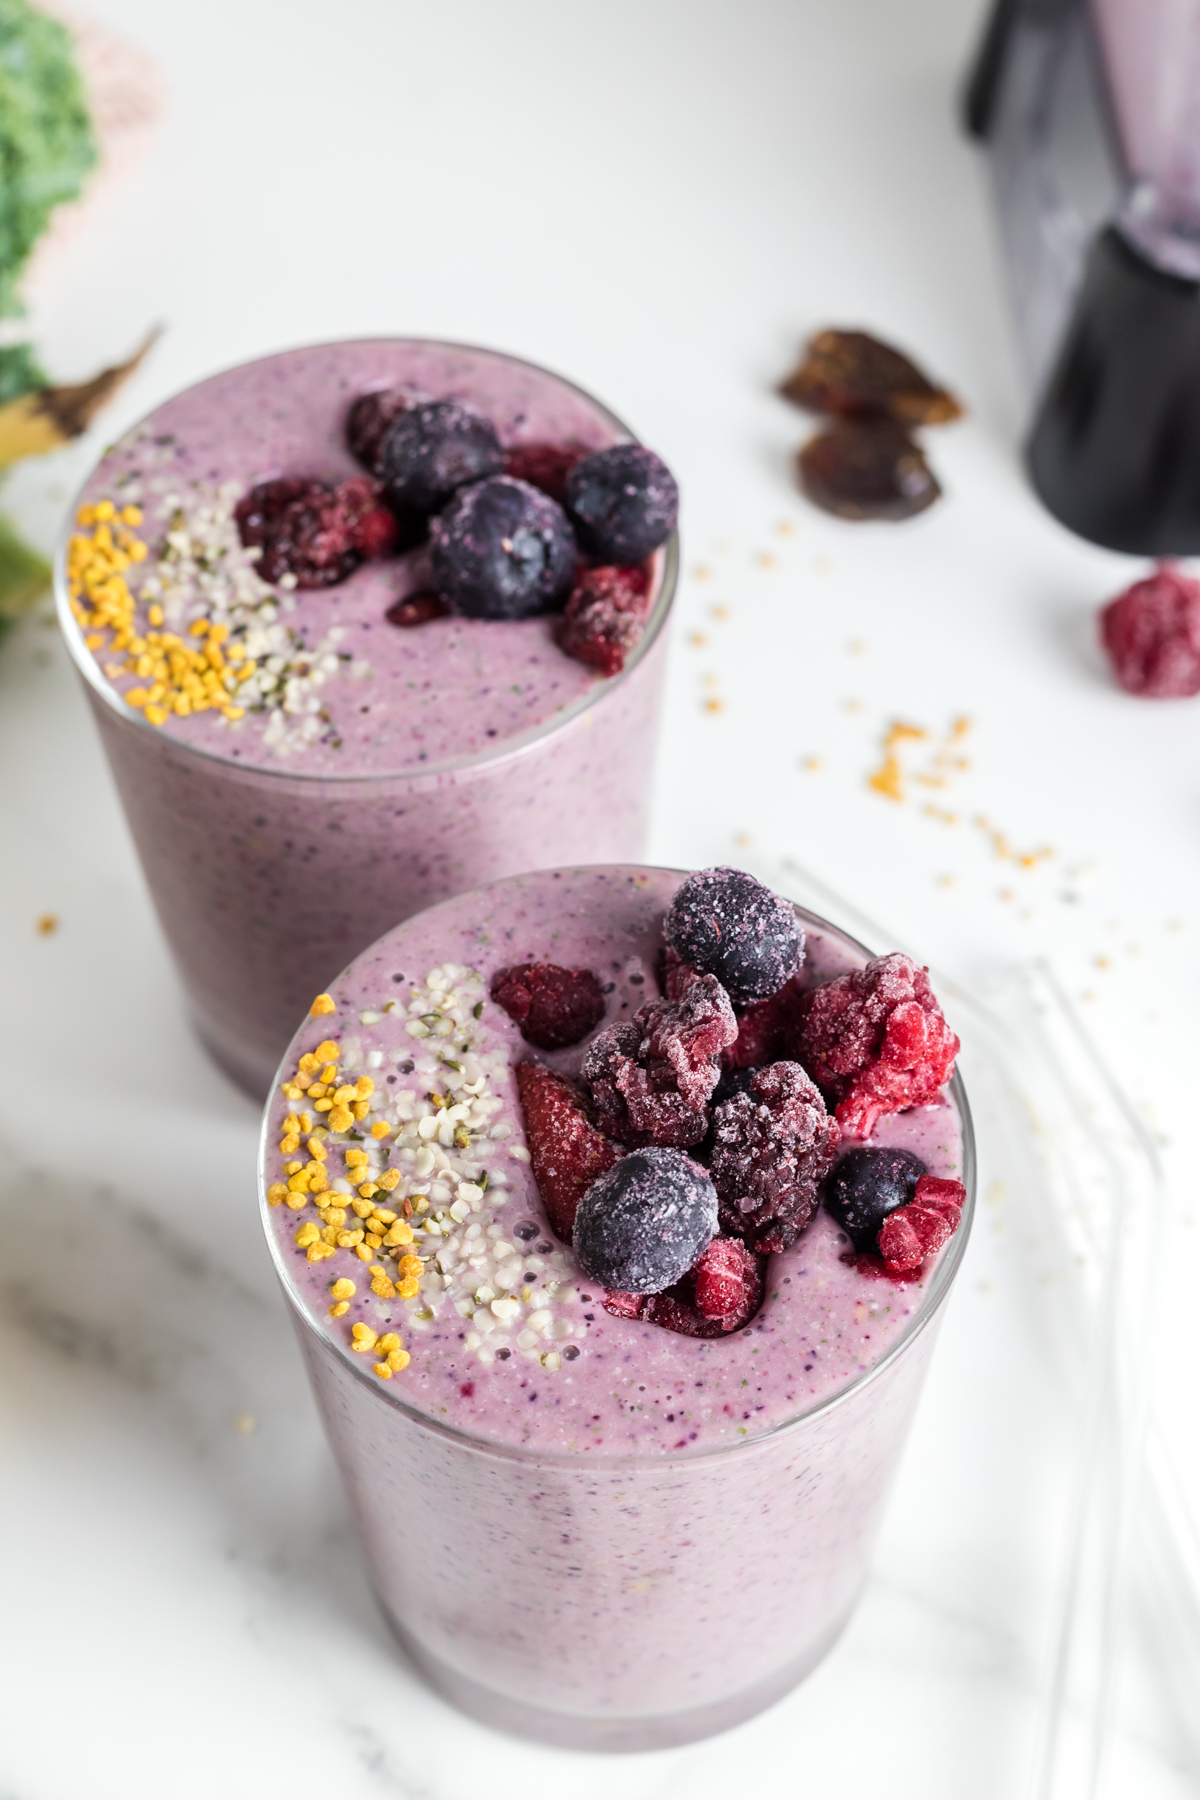 This Mixed Berry Smoothie combines frozen berries, bananas, vanilla Greek yogurt, and more for a healthy, refreshing breakfast! You won’t even taste the hidden greens in these frozen fruity smoothies! via @foodhussy